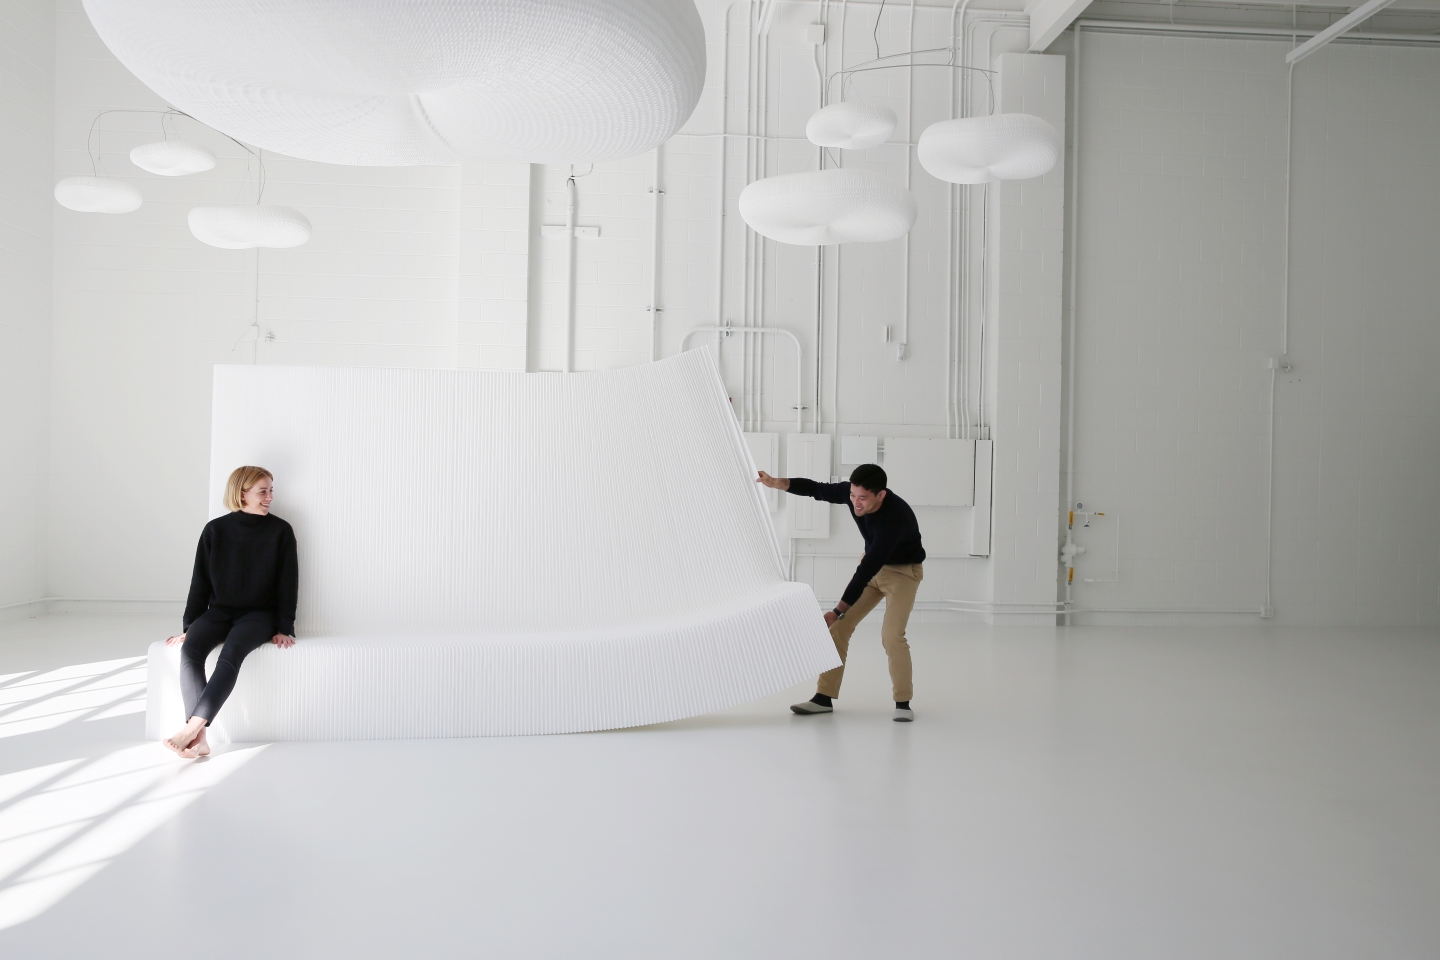 stretching open a white textile benchwall underneath a canopy of cloud mobiles